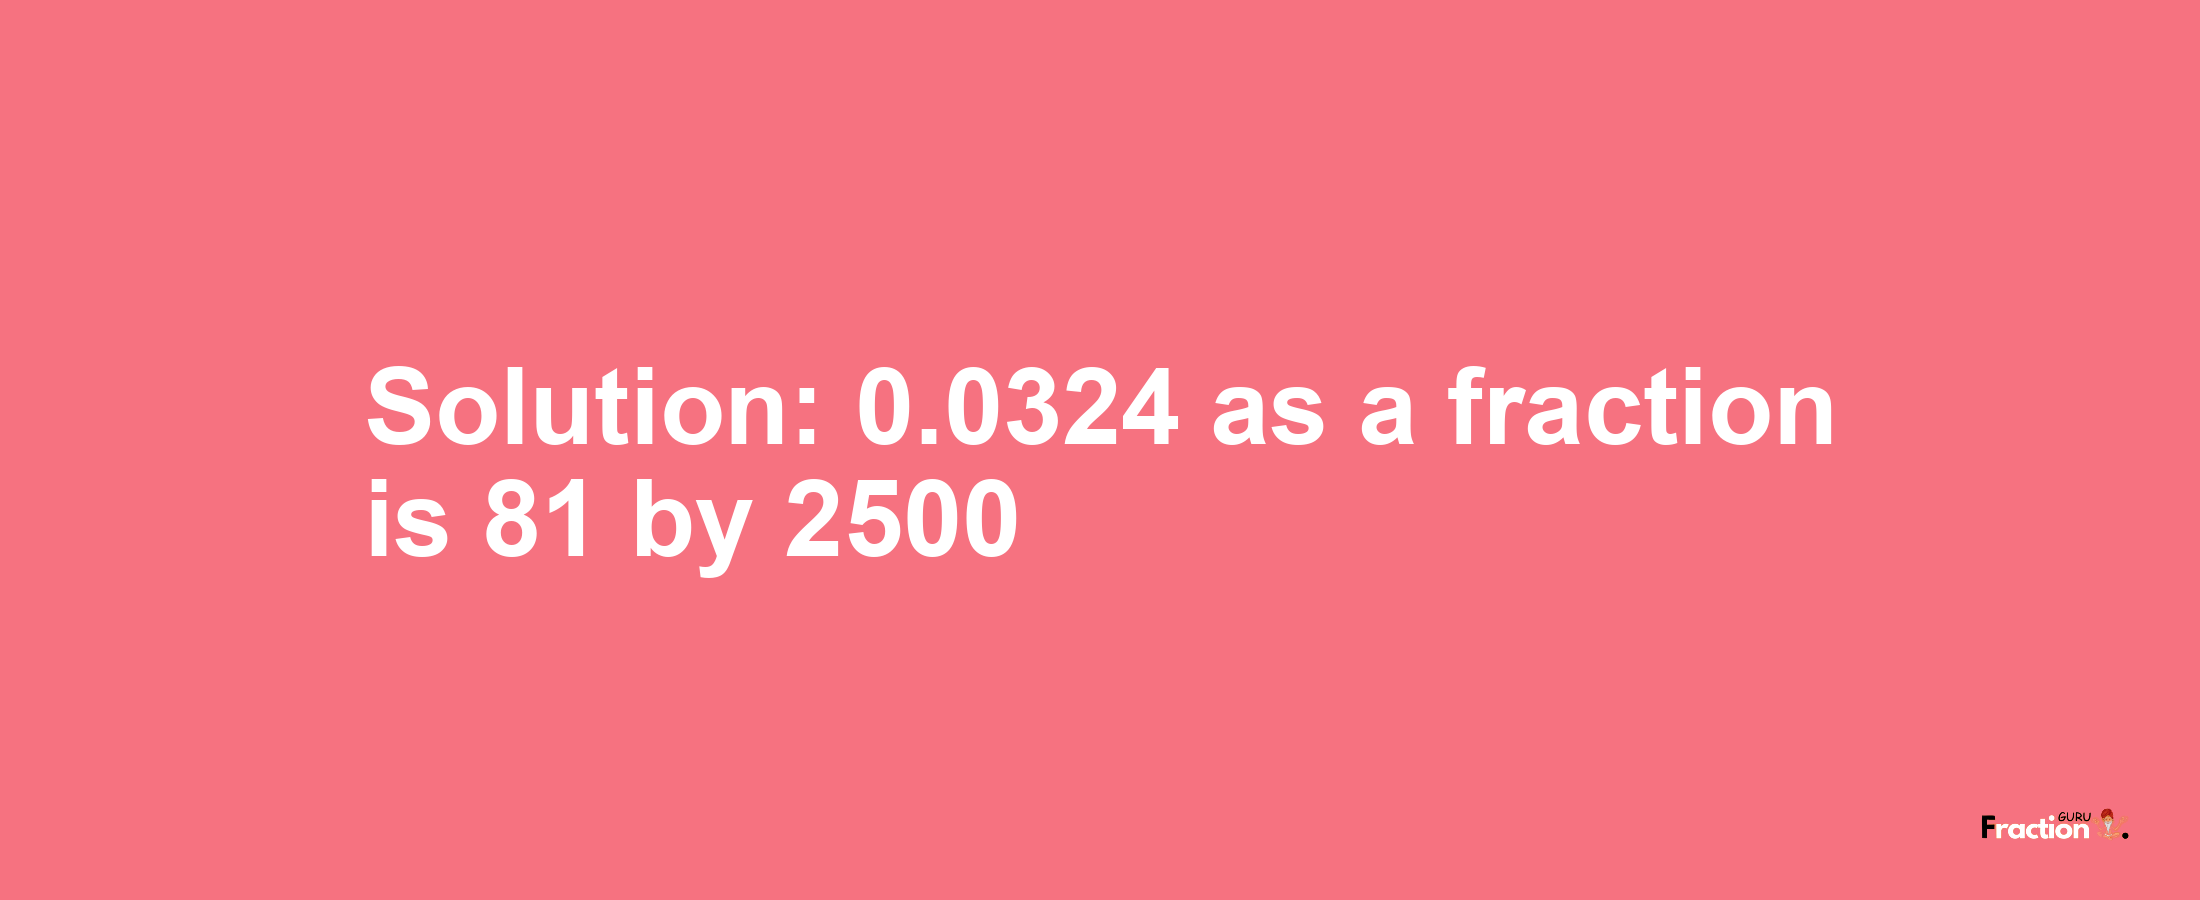 Solution:0.0324 as a fraction is 81/2500